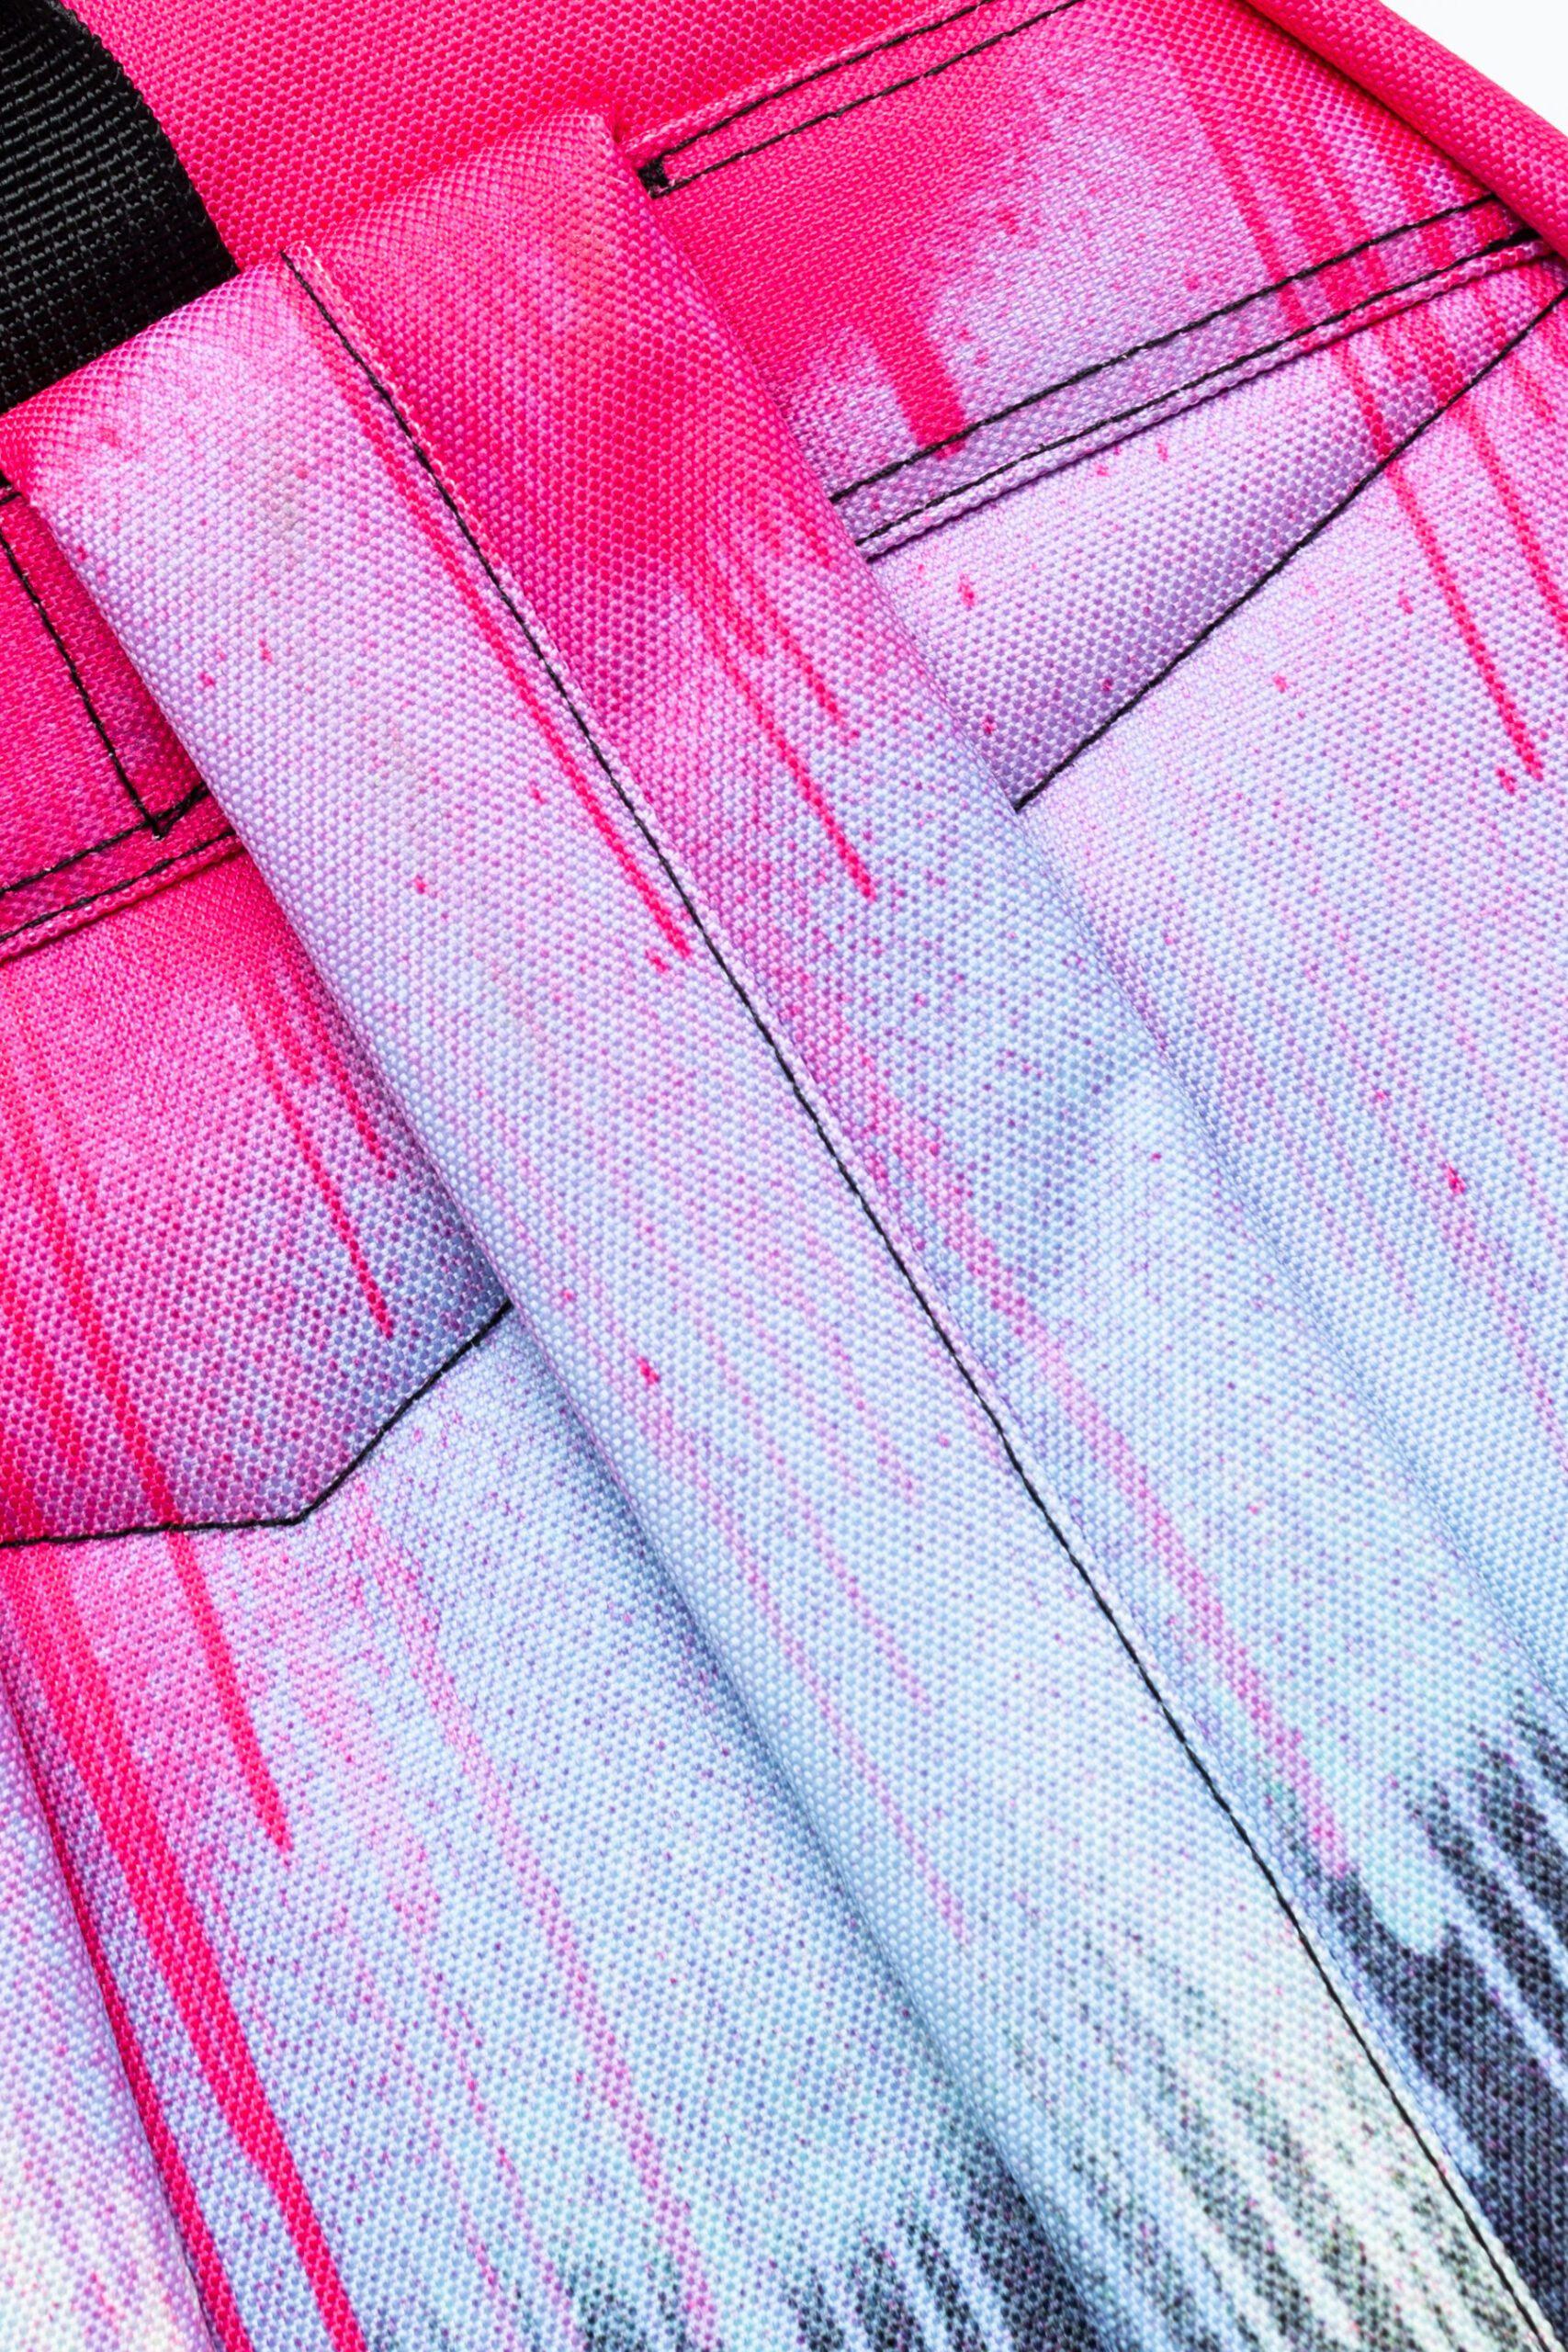 Hype pink and black paint drip backpack strap close up